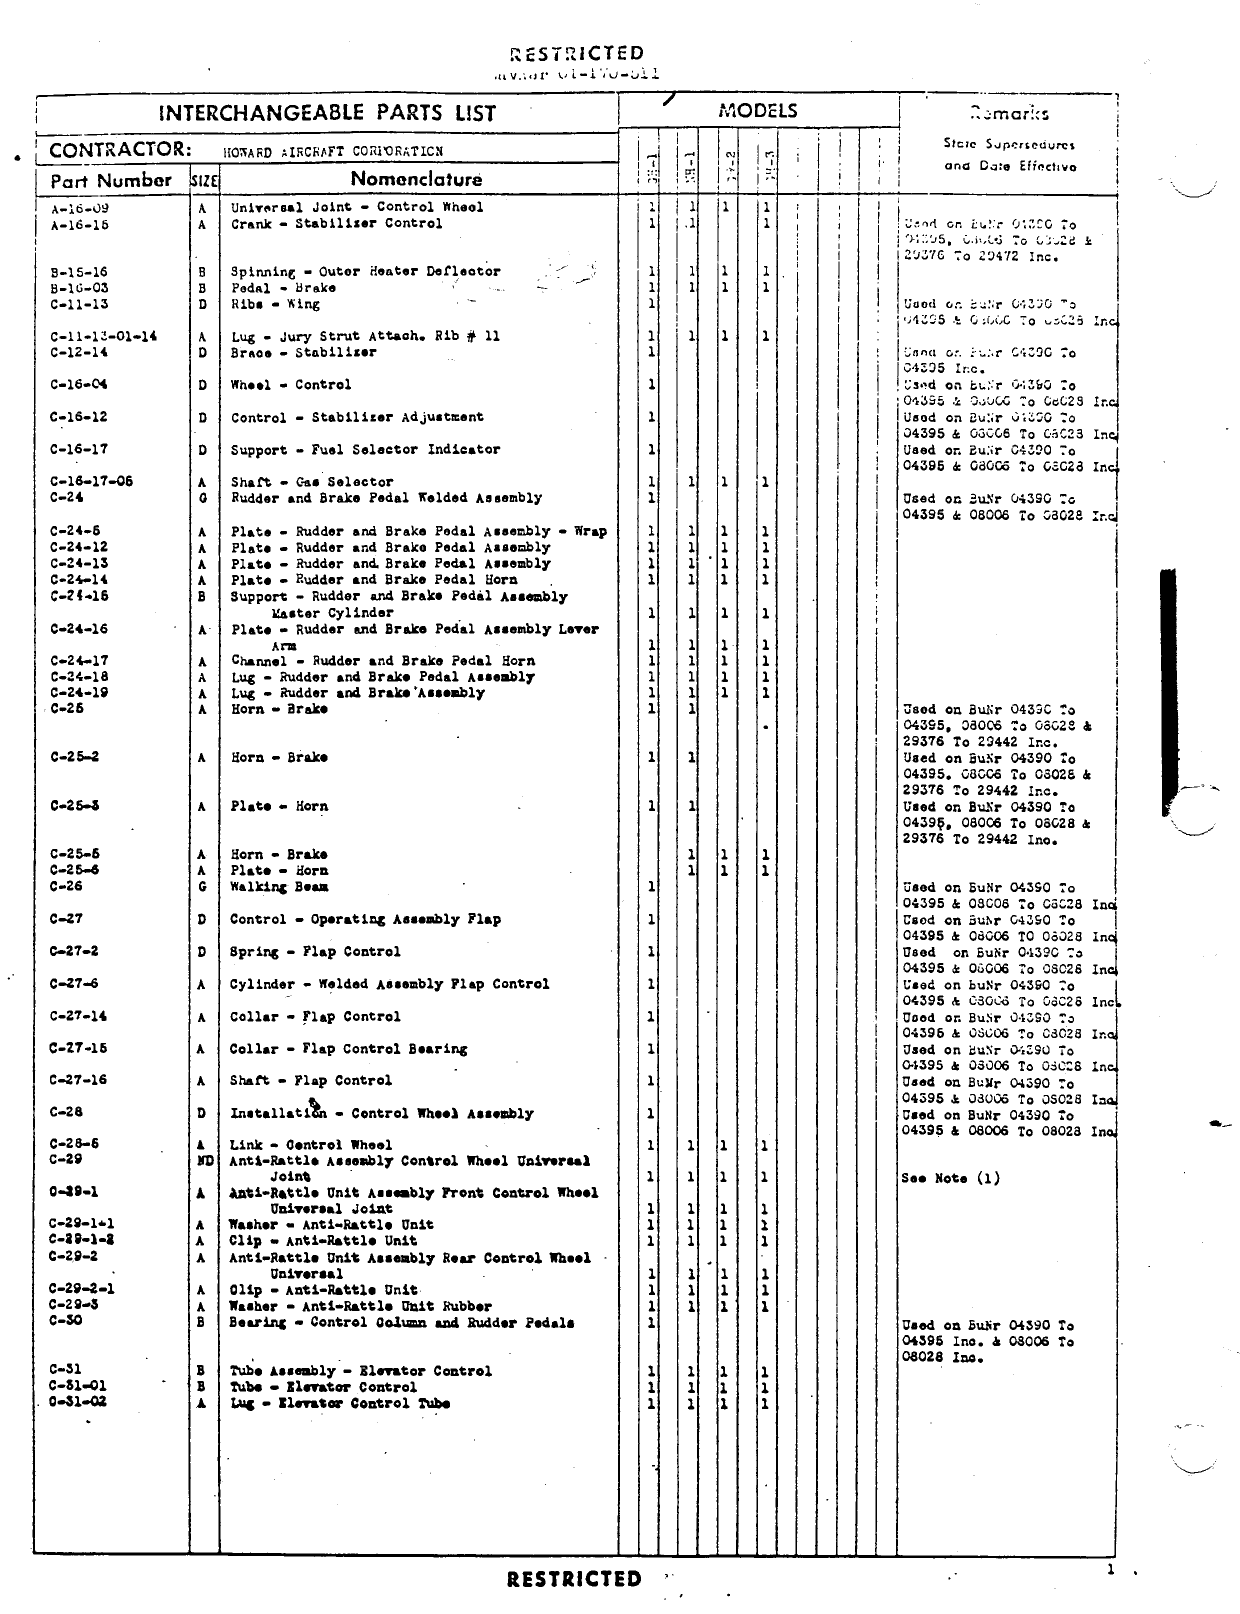 Sample page 4 from AirCorps Library document: Interchangeable Parts Catalog - GH-1, GH-2, GH-3, NH-1